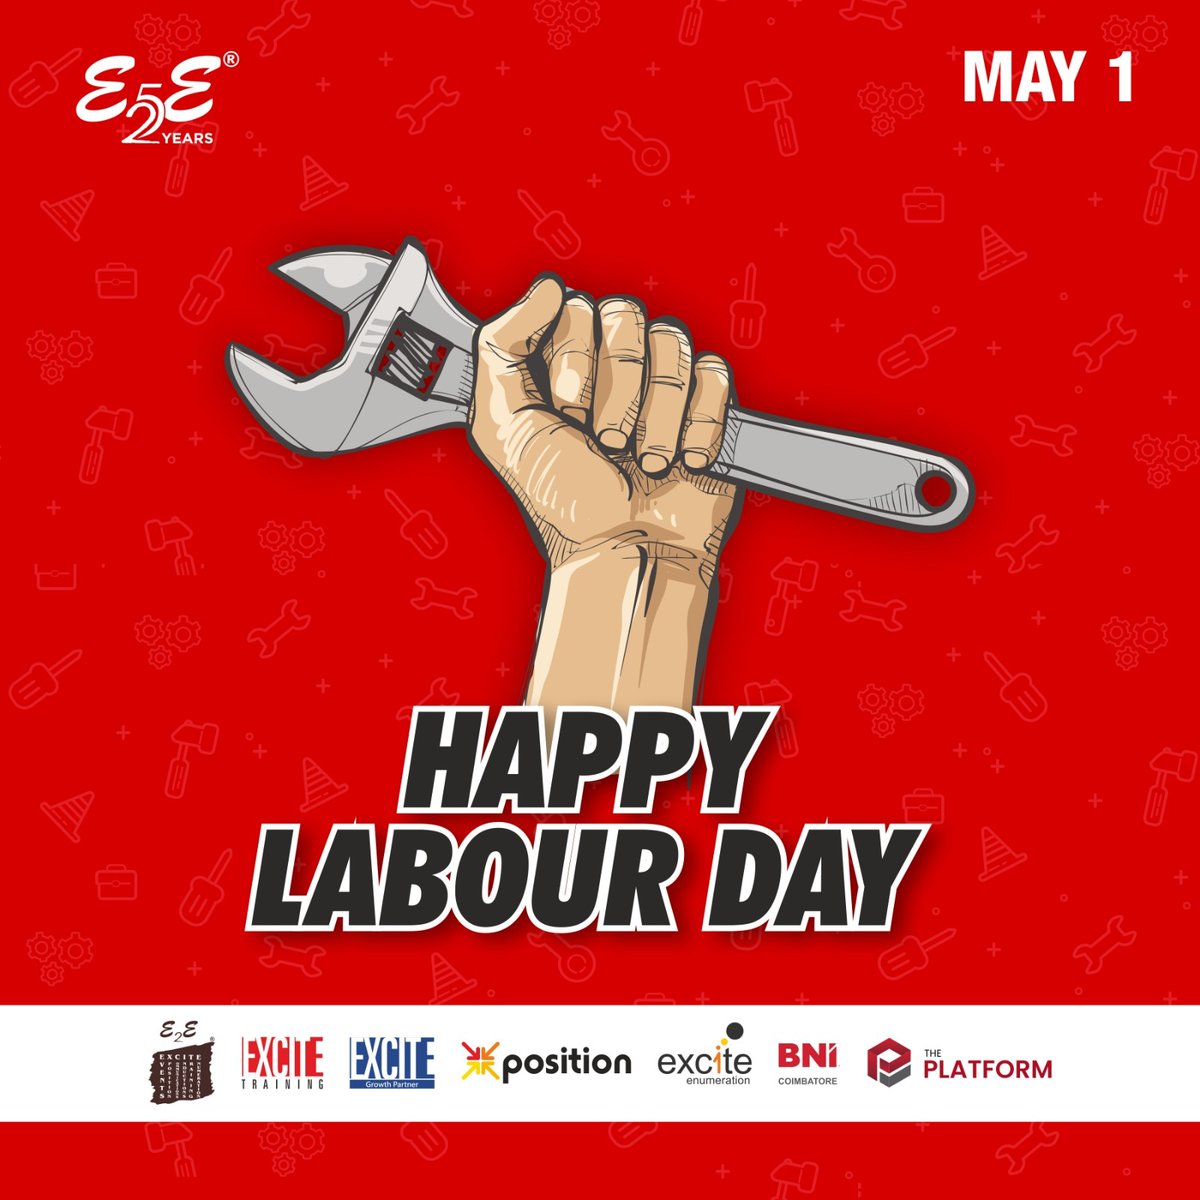 May this day serve as a reminder of the hard work and dedication that goes into building successful businesses, and may you all continue to strive for excellence in your endeavours. Happy Labour Day! #labourday #may1st #2023 #business #businessowners #entrepreneurs